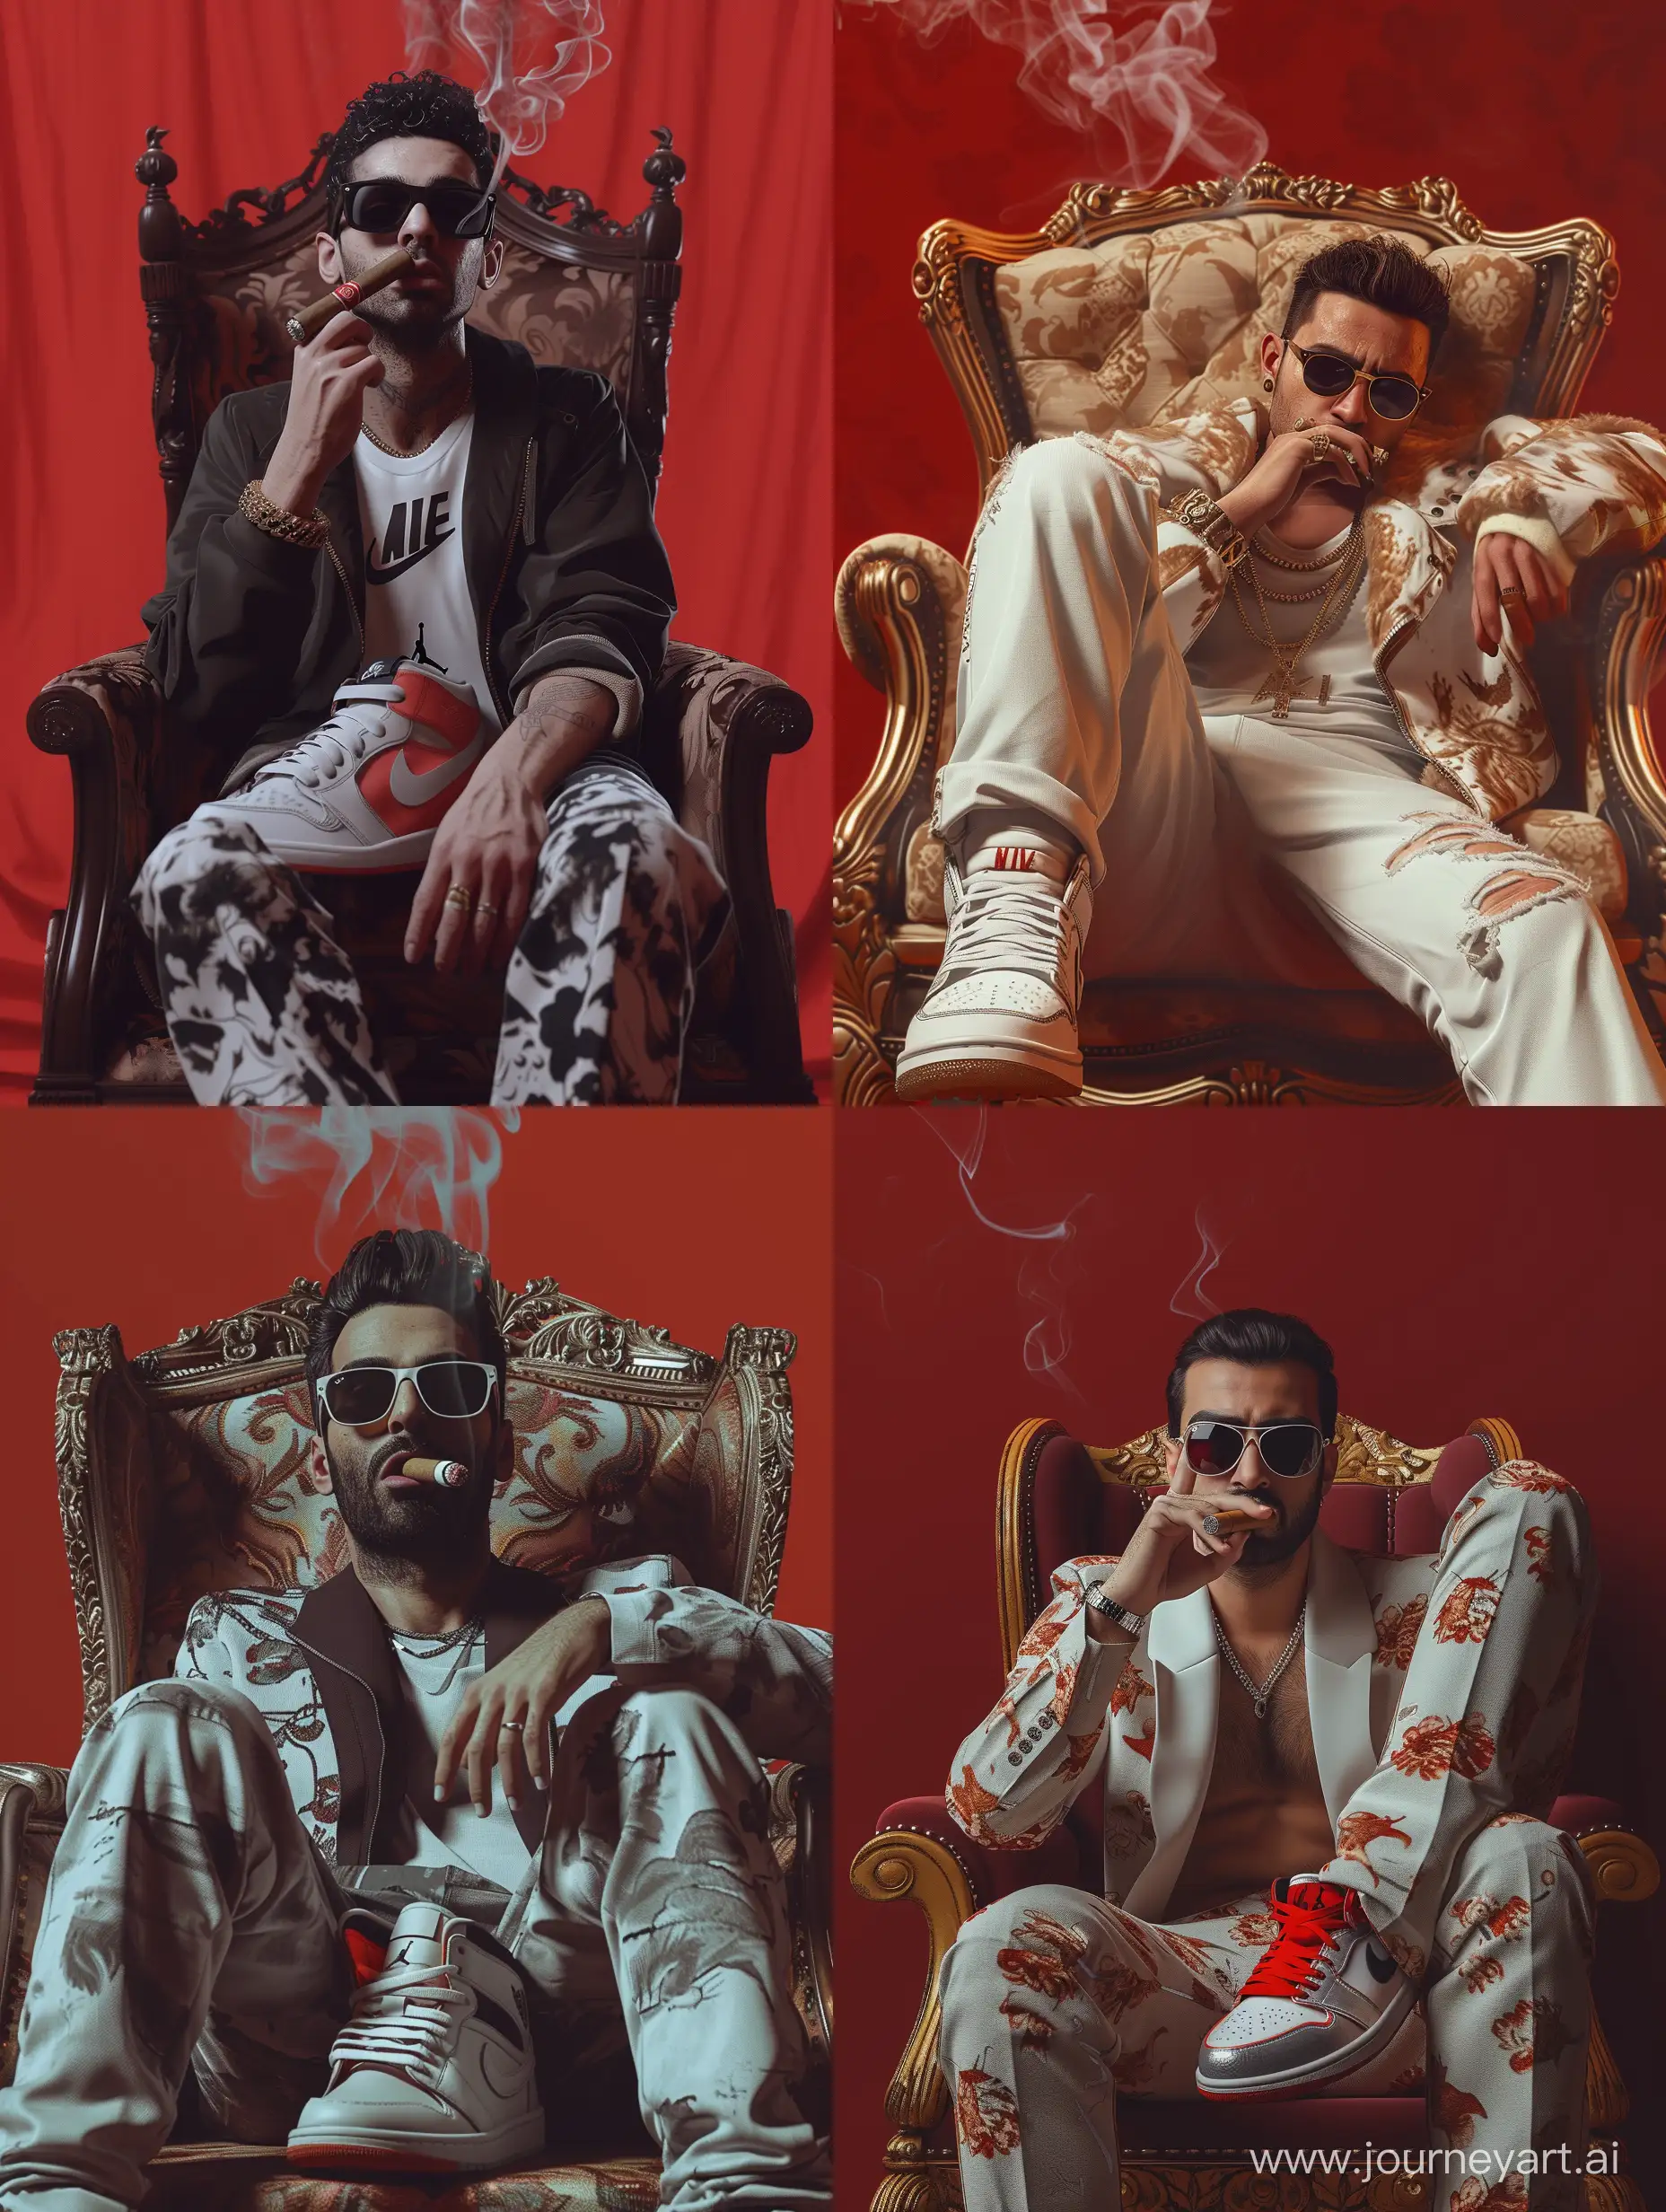 Persian-Man-in-Stylish-Nike-AJ-Shoes-and-Fashionable-Attire-Smoking-a-Cigar-on-a-Royalty-Chair